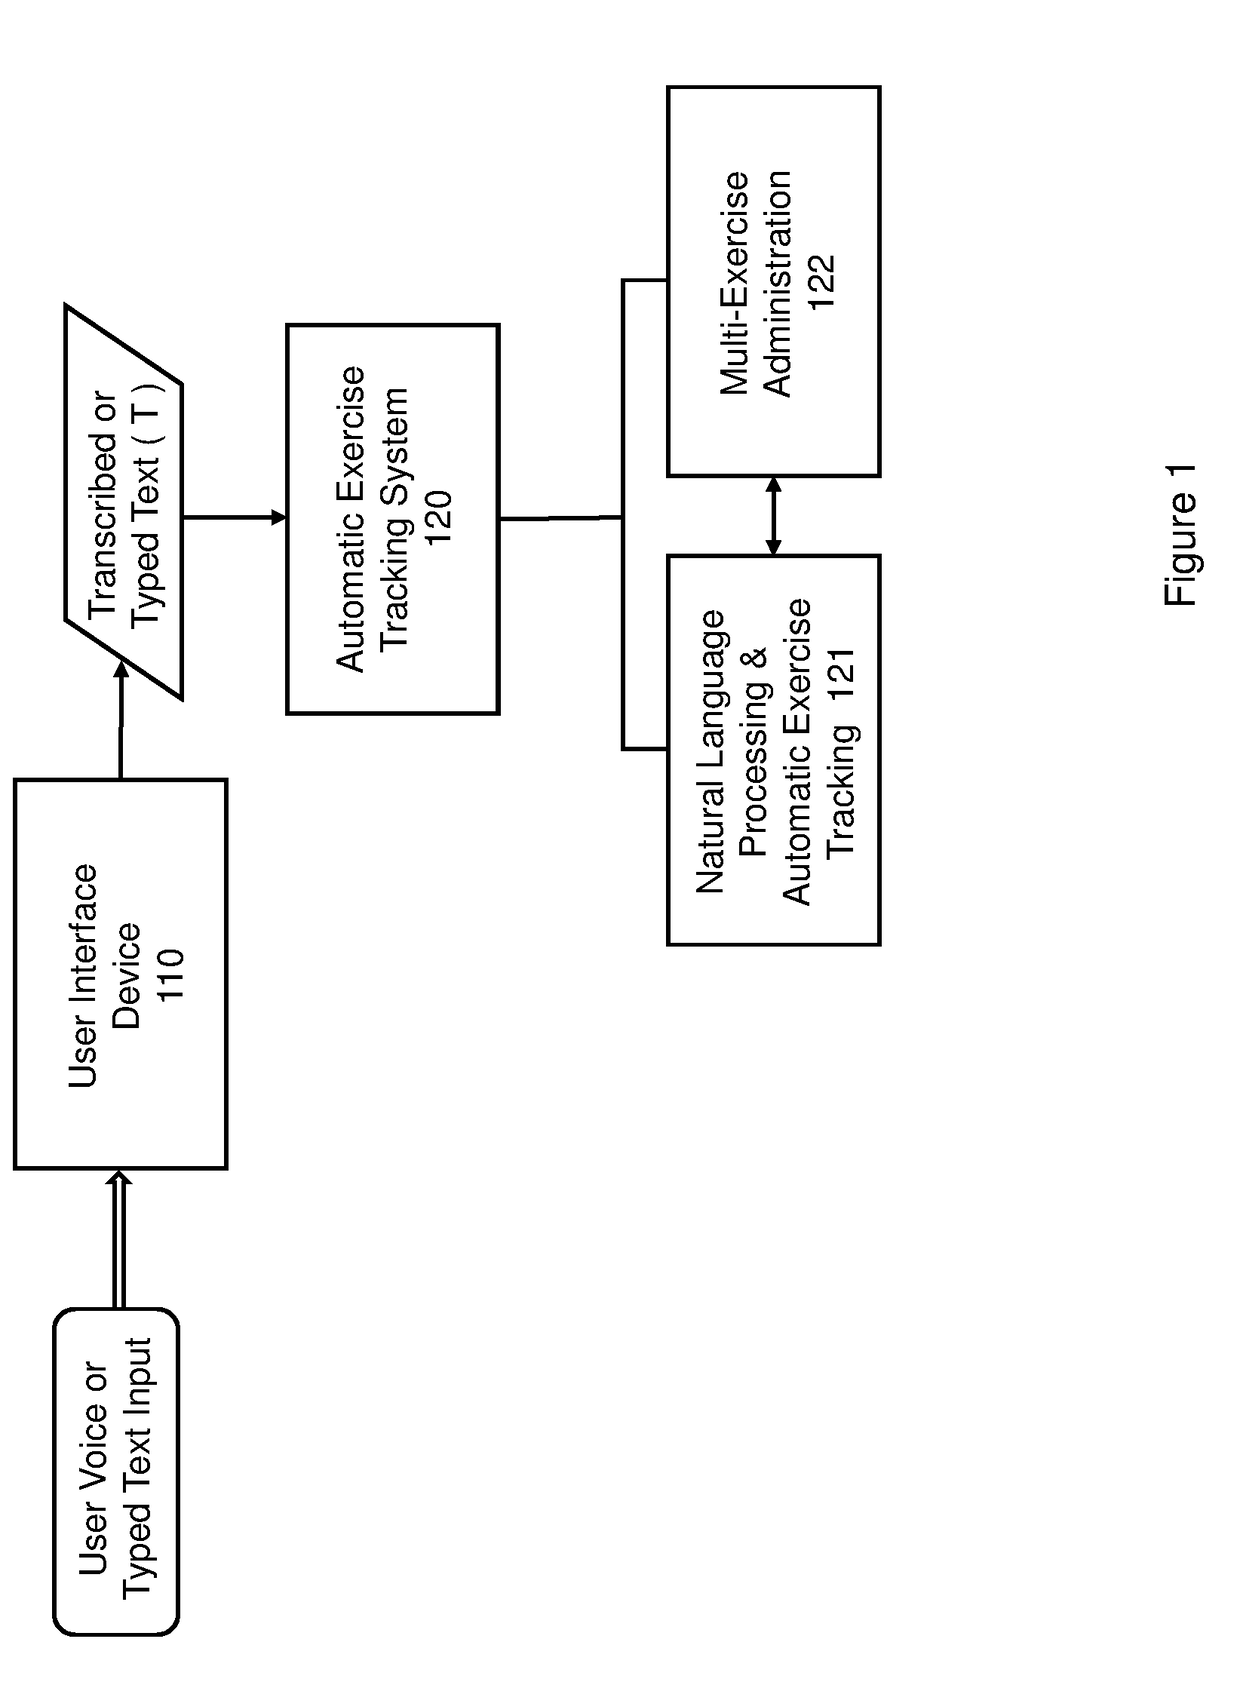 Automatic application-based exercise tracking system and method